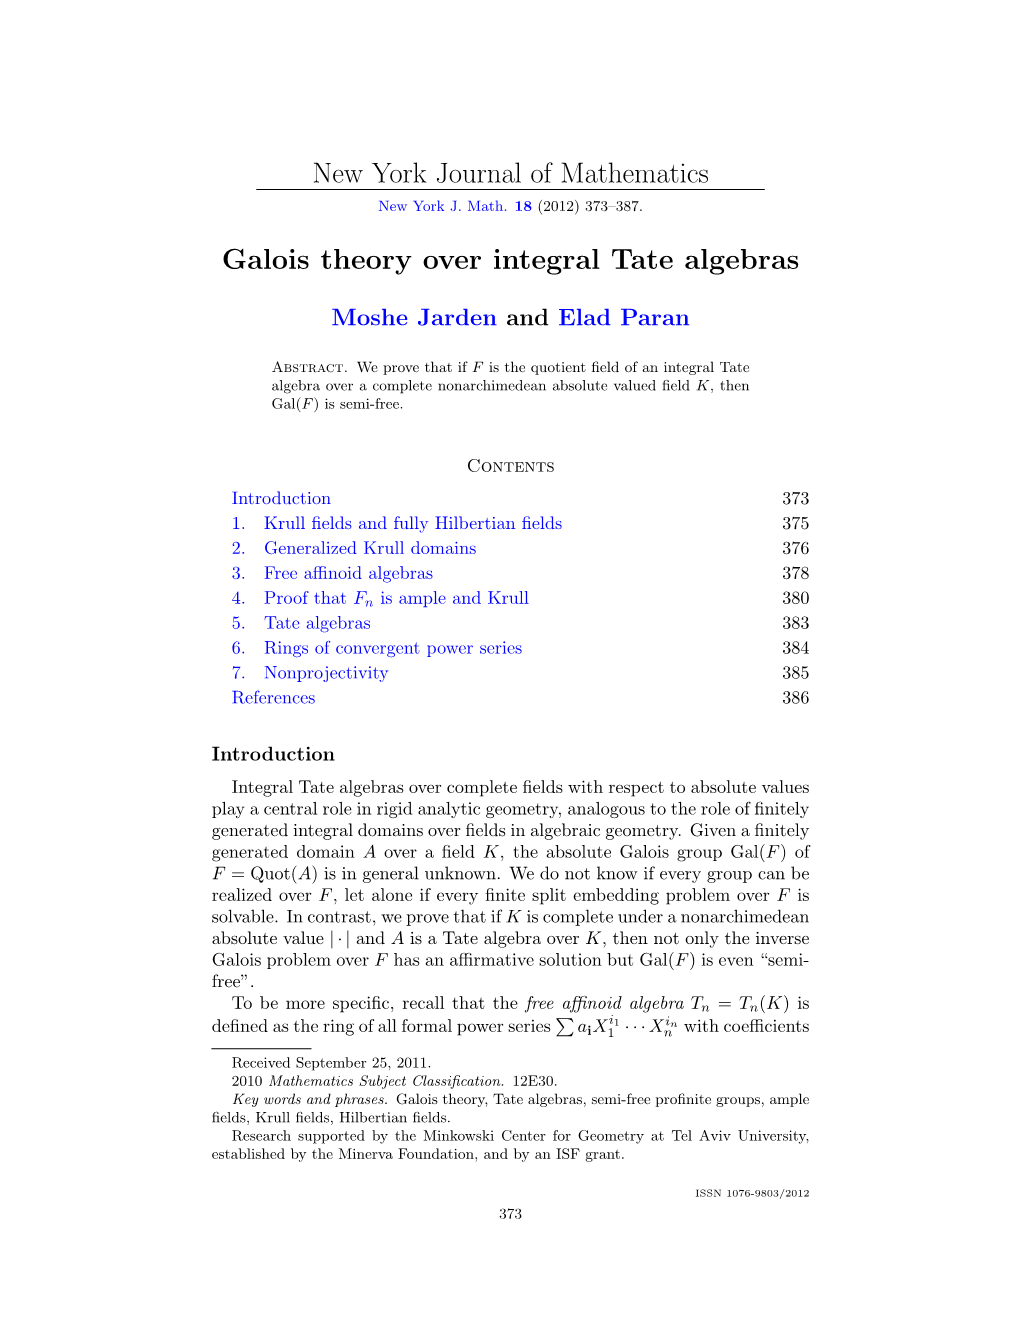 New York Journal of Mathematics Galois Theory Over Integral Tate